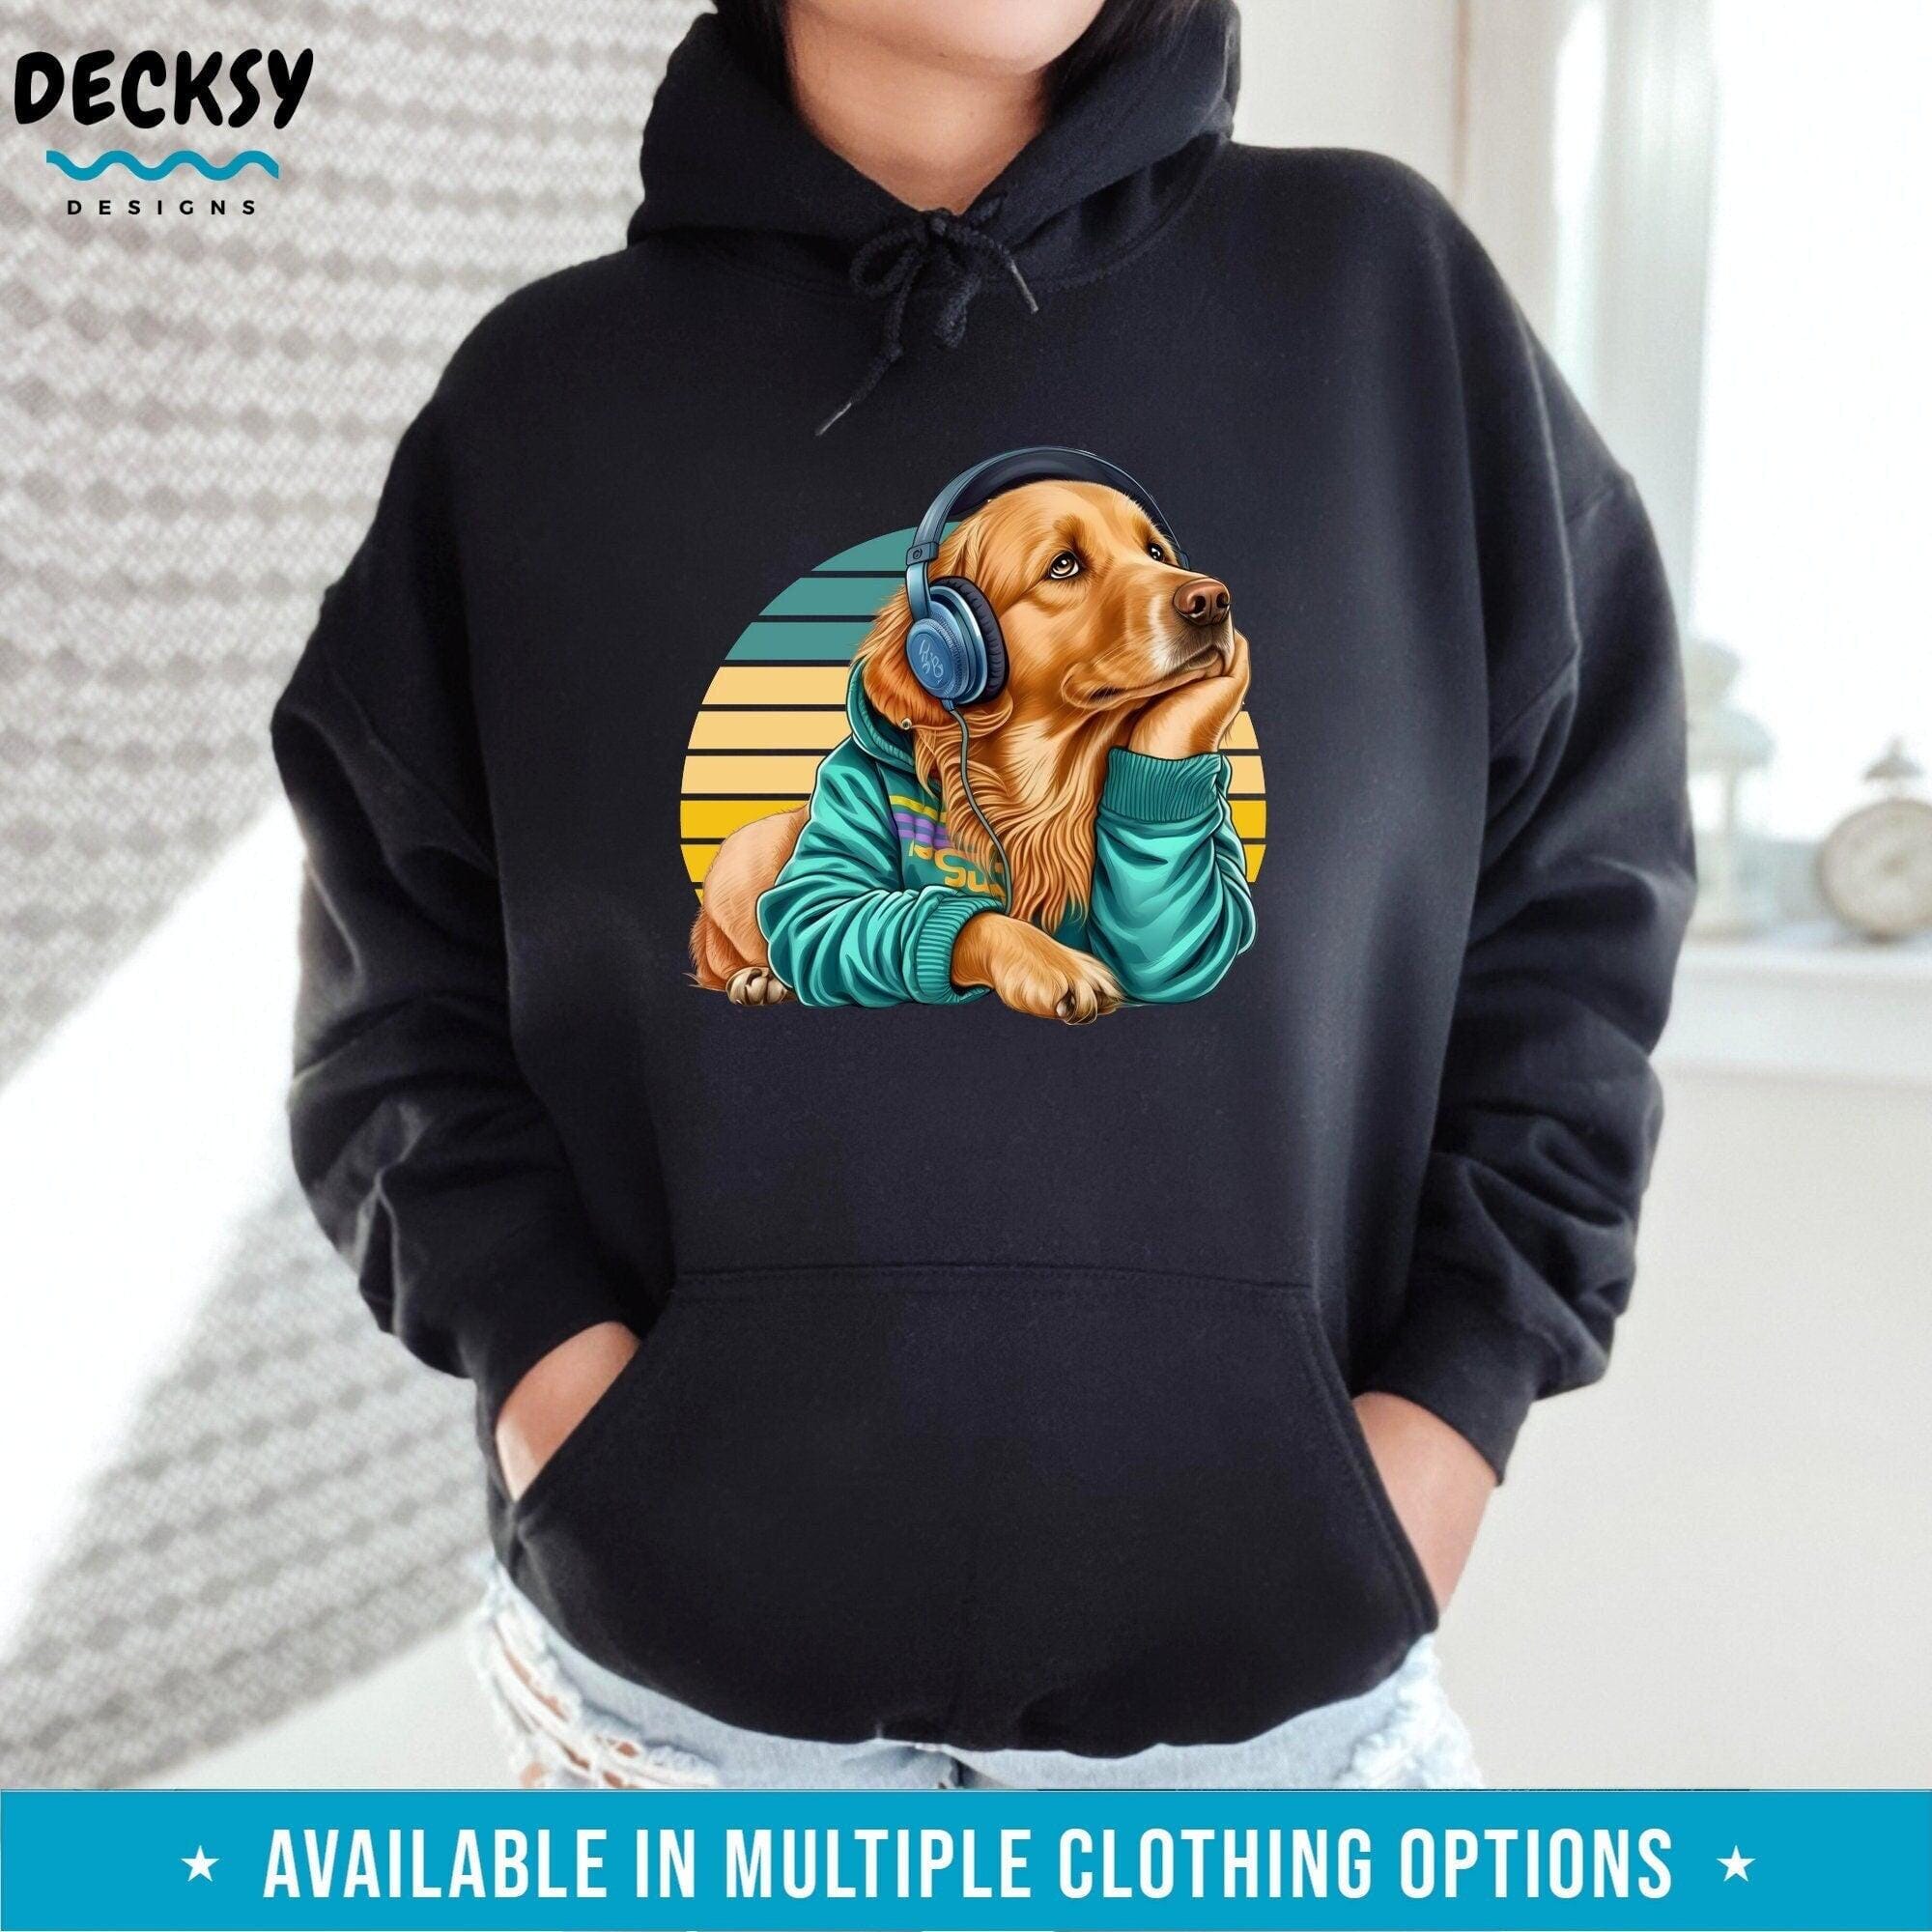 Golden Retriever Dog Shirt, Cute Dog Lover Gift-Clothing:Gender-Neutral Adult Clothing:Tops & Tees:T-shirts:Graphic Tees-DecksyDesigns